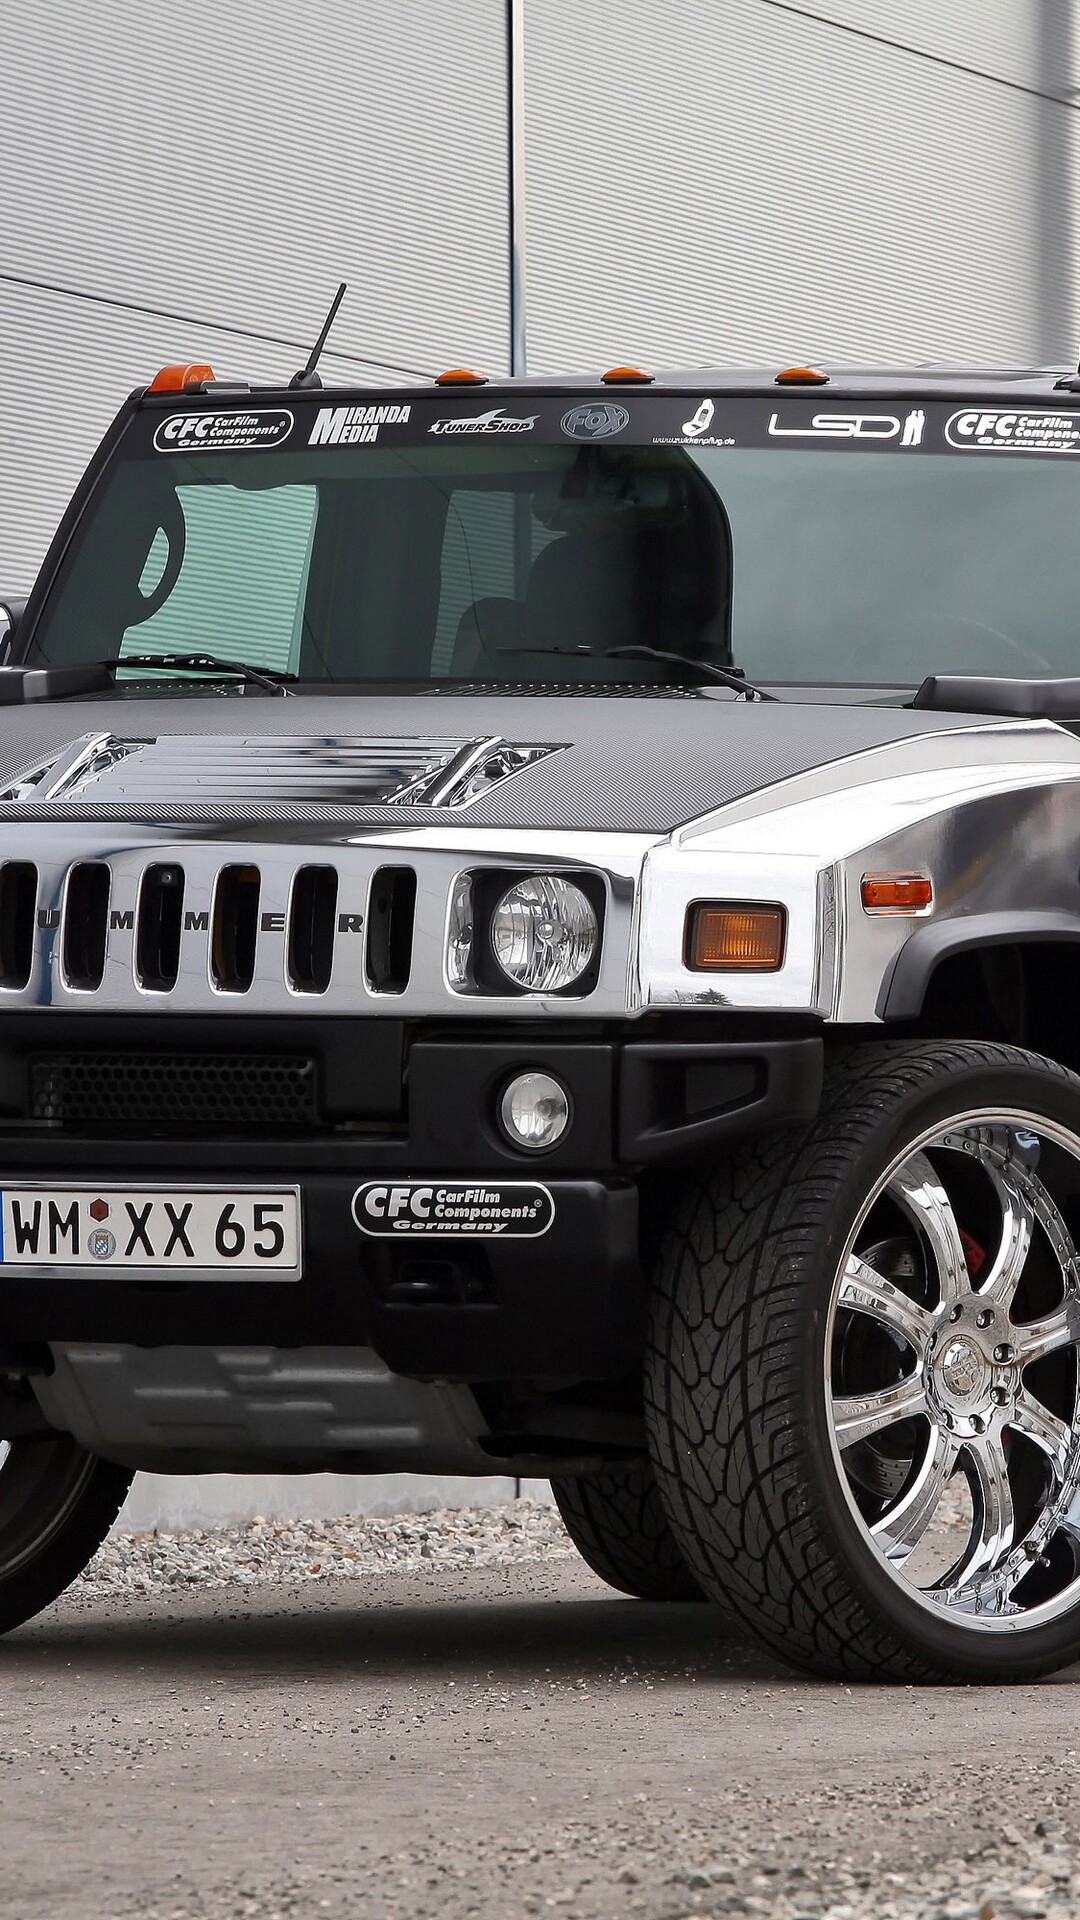 Hummer: H2 model, AM General sold the brand name to General Motors in December 1999. 1080x1920 Full HD Wallpaper.